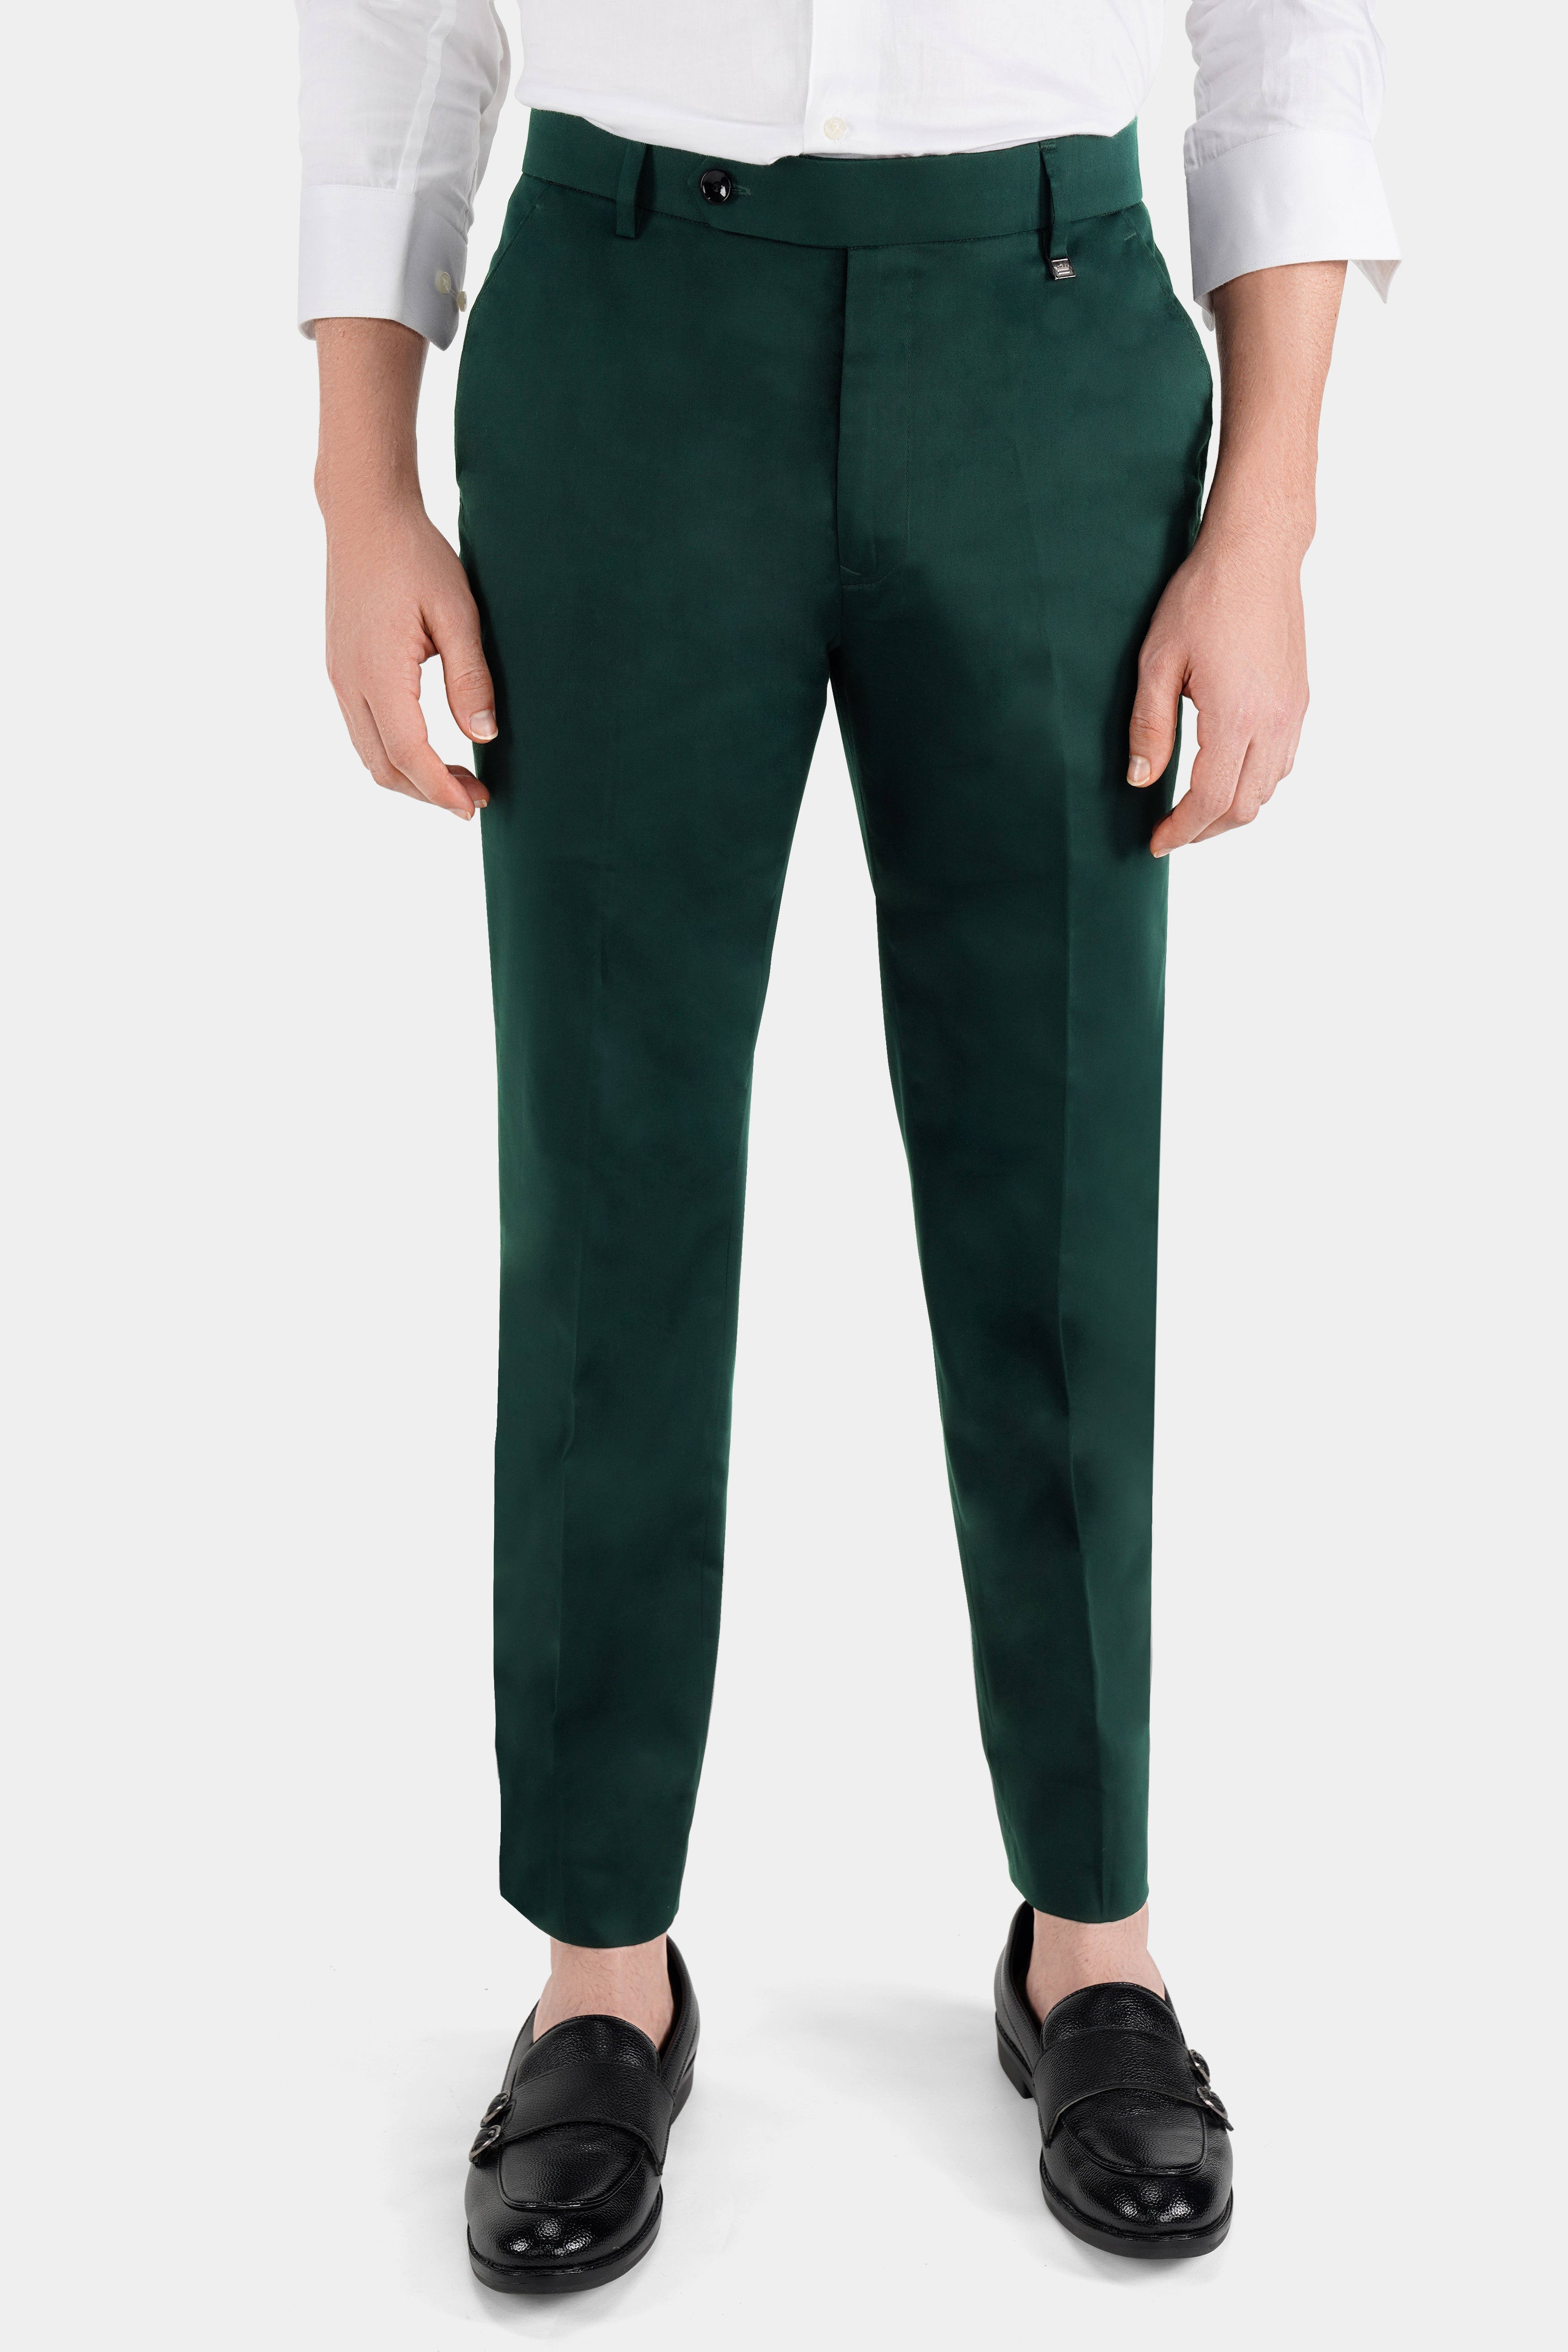 Rifle Green Plain-Solid Regular Fit Terry-Rayon Pant For Men